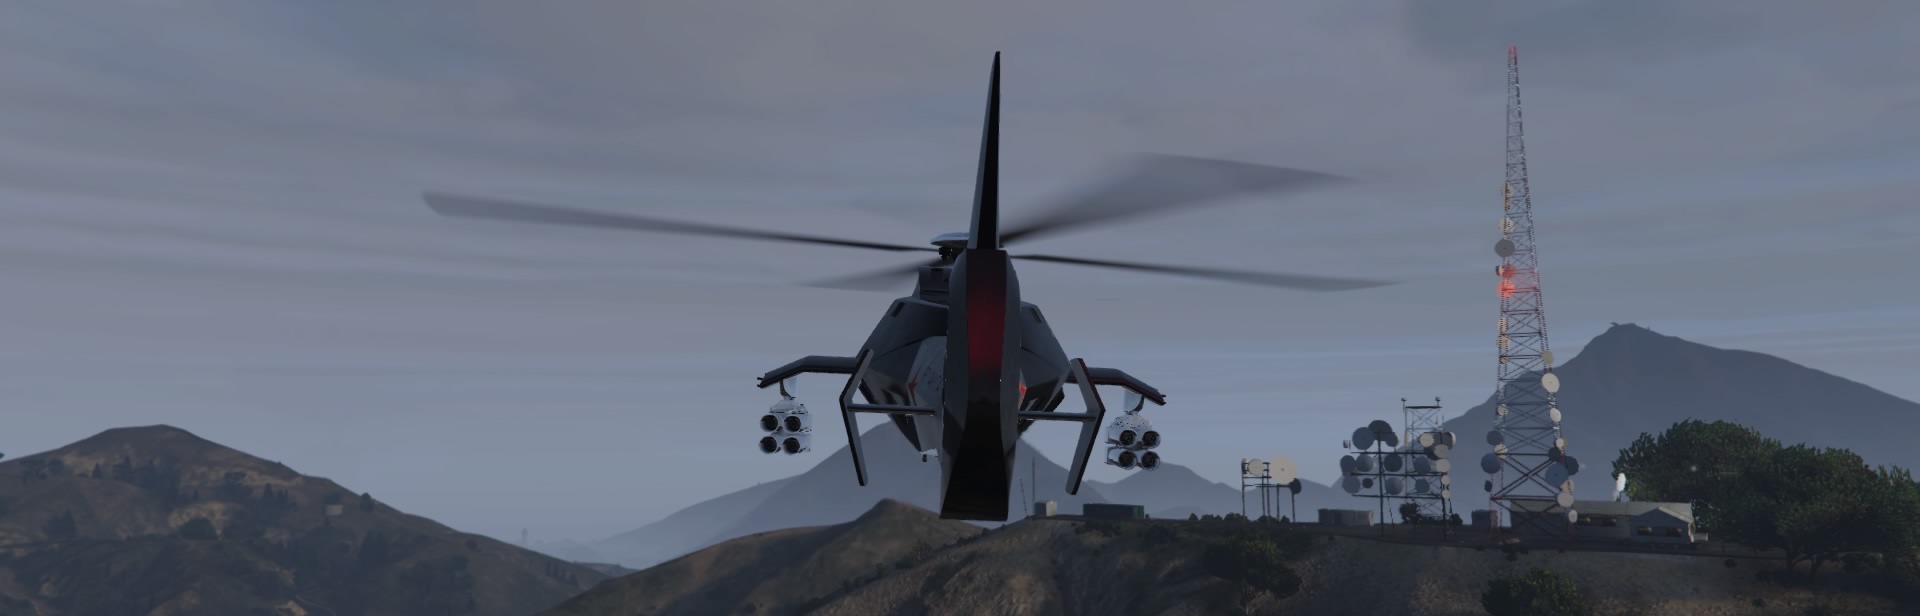 Dark red ghost helicopter next to radio base 